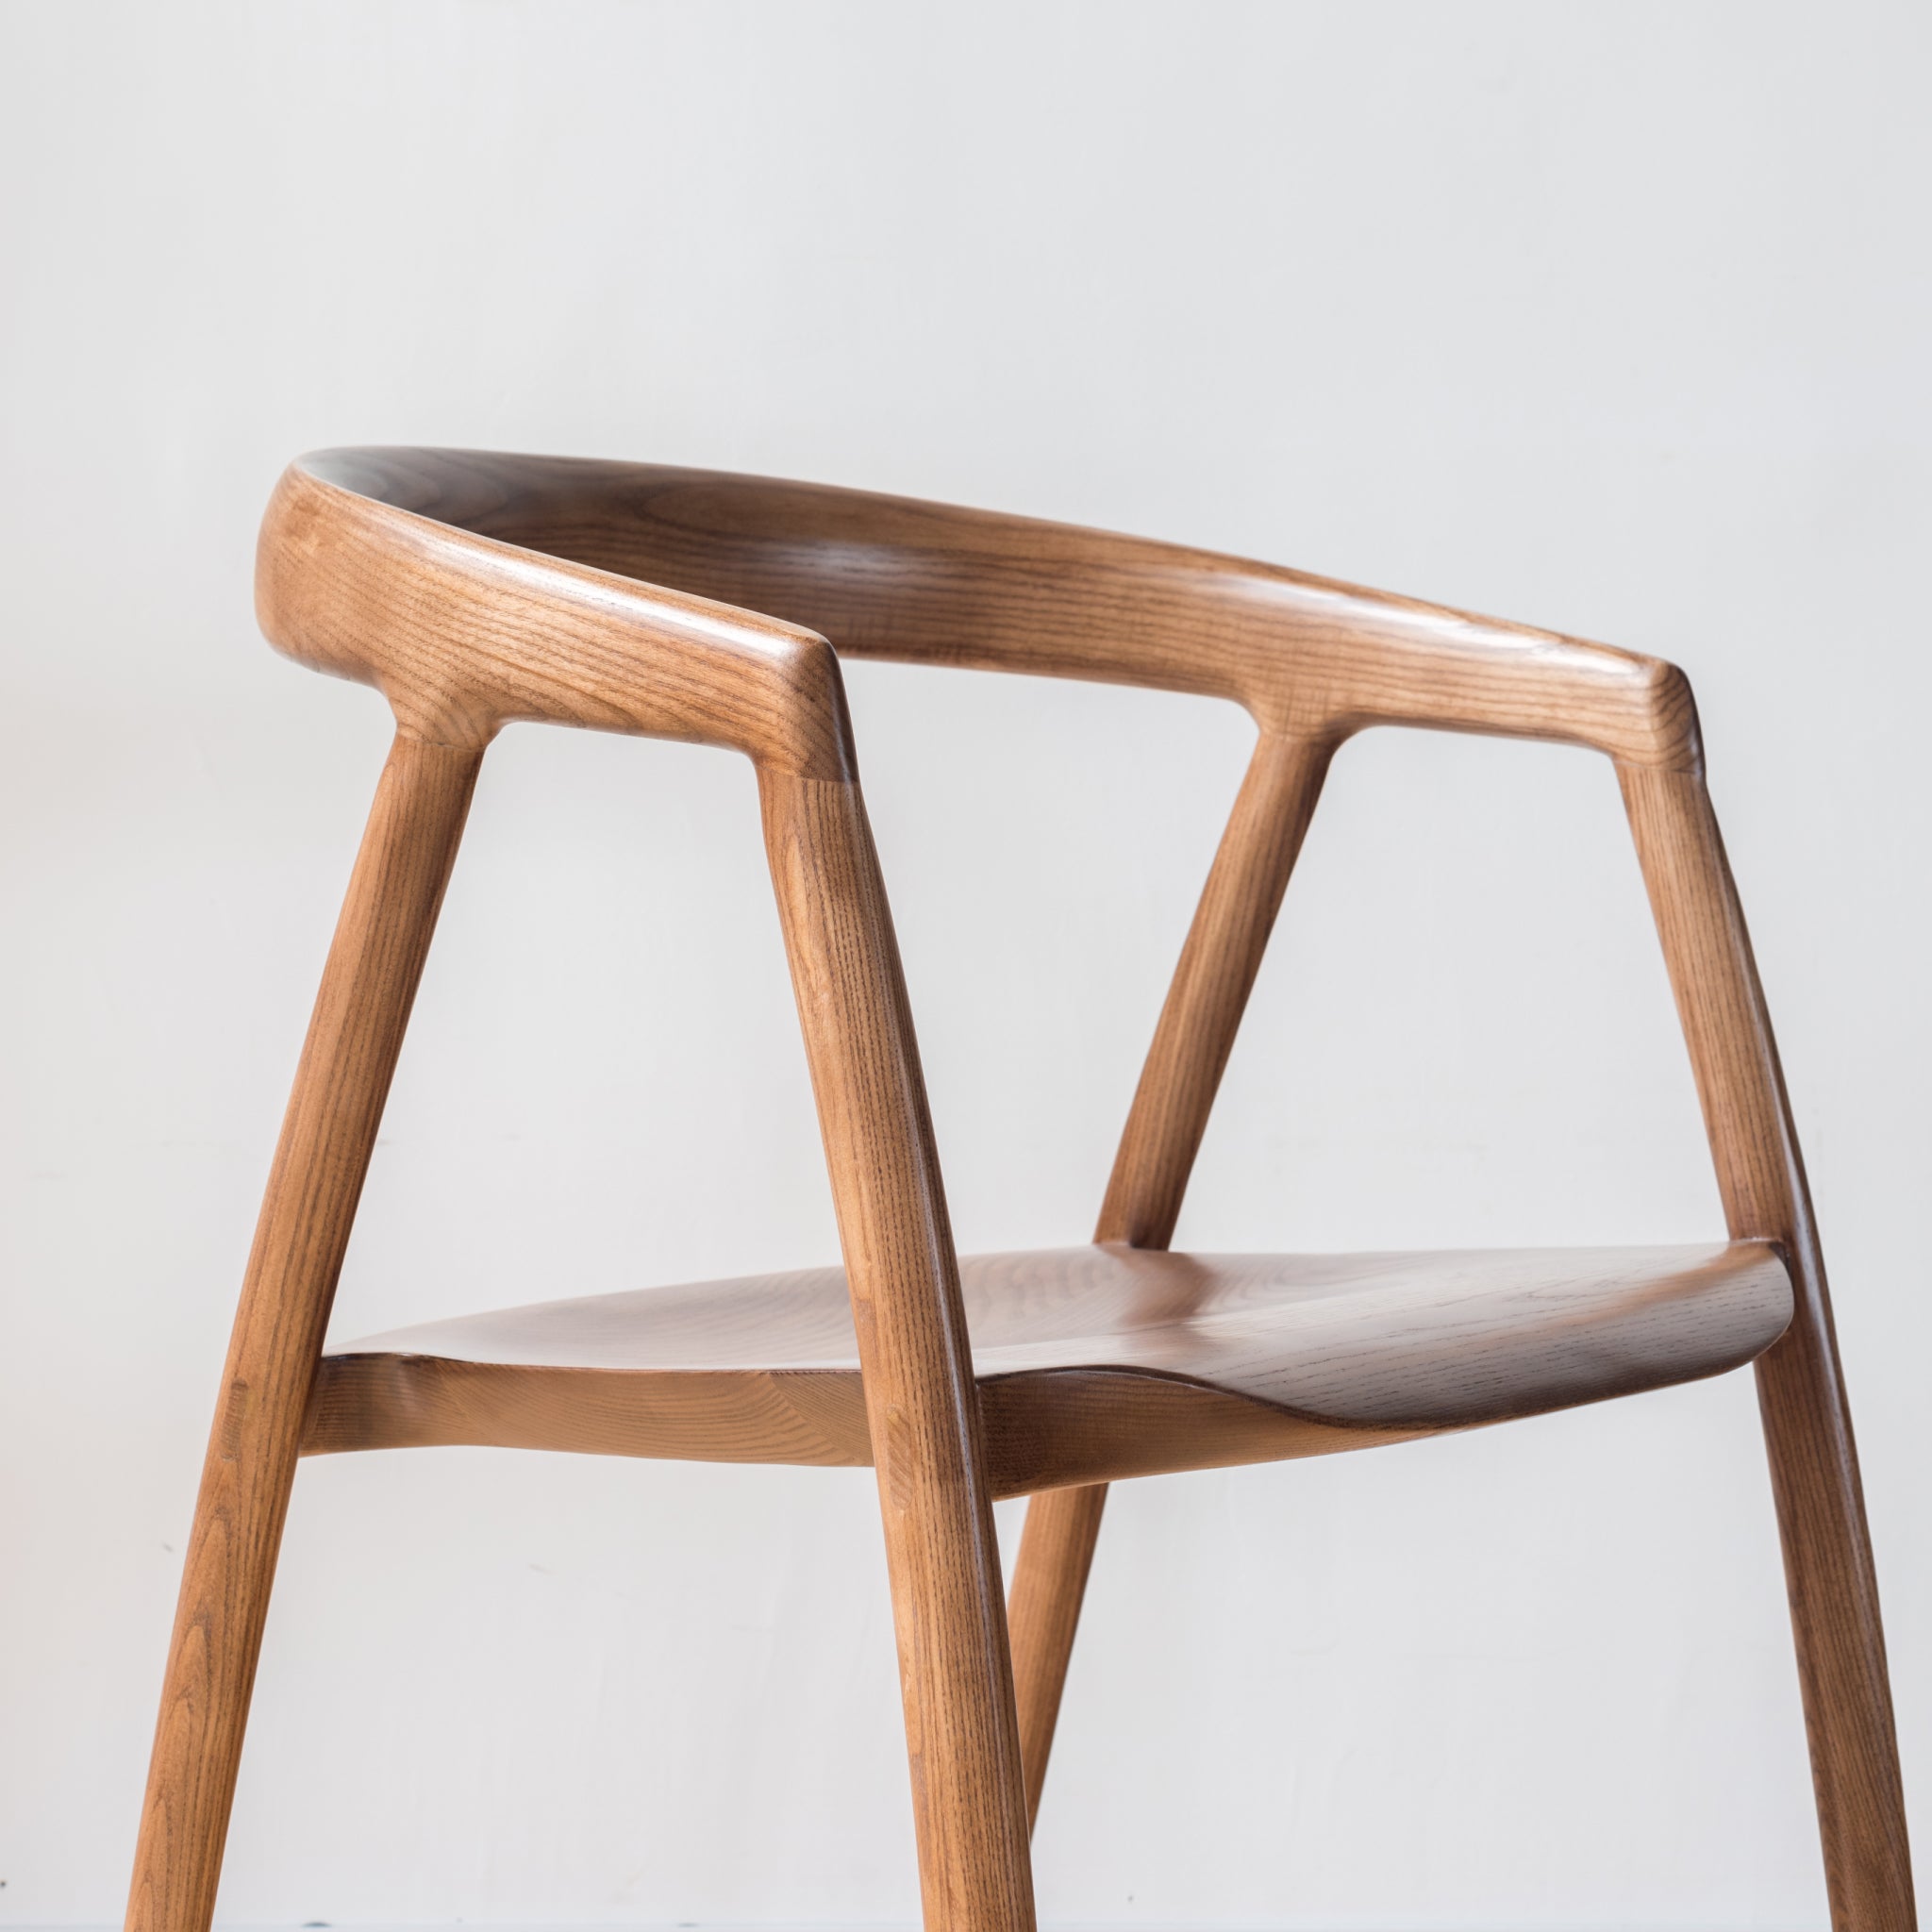 Adeline Dining Chair with Arms, Walnut